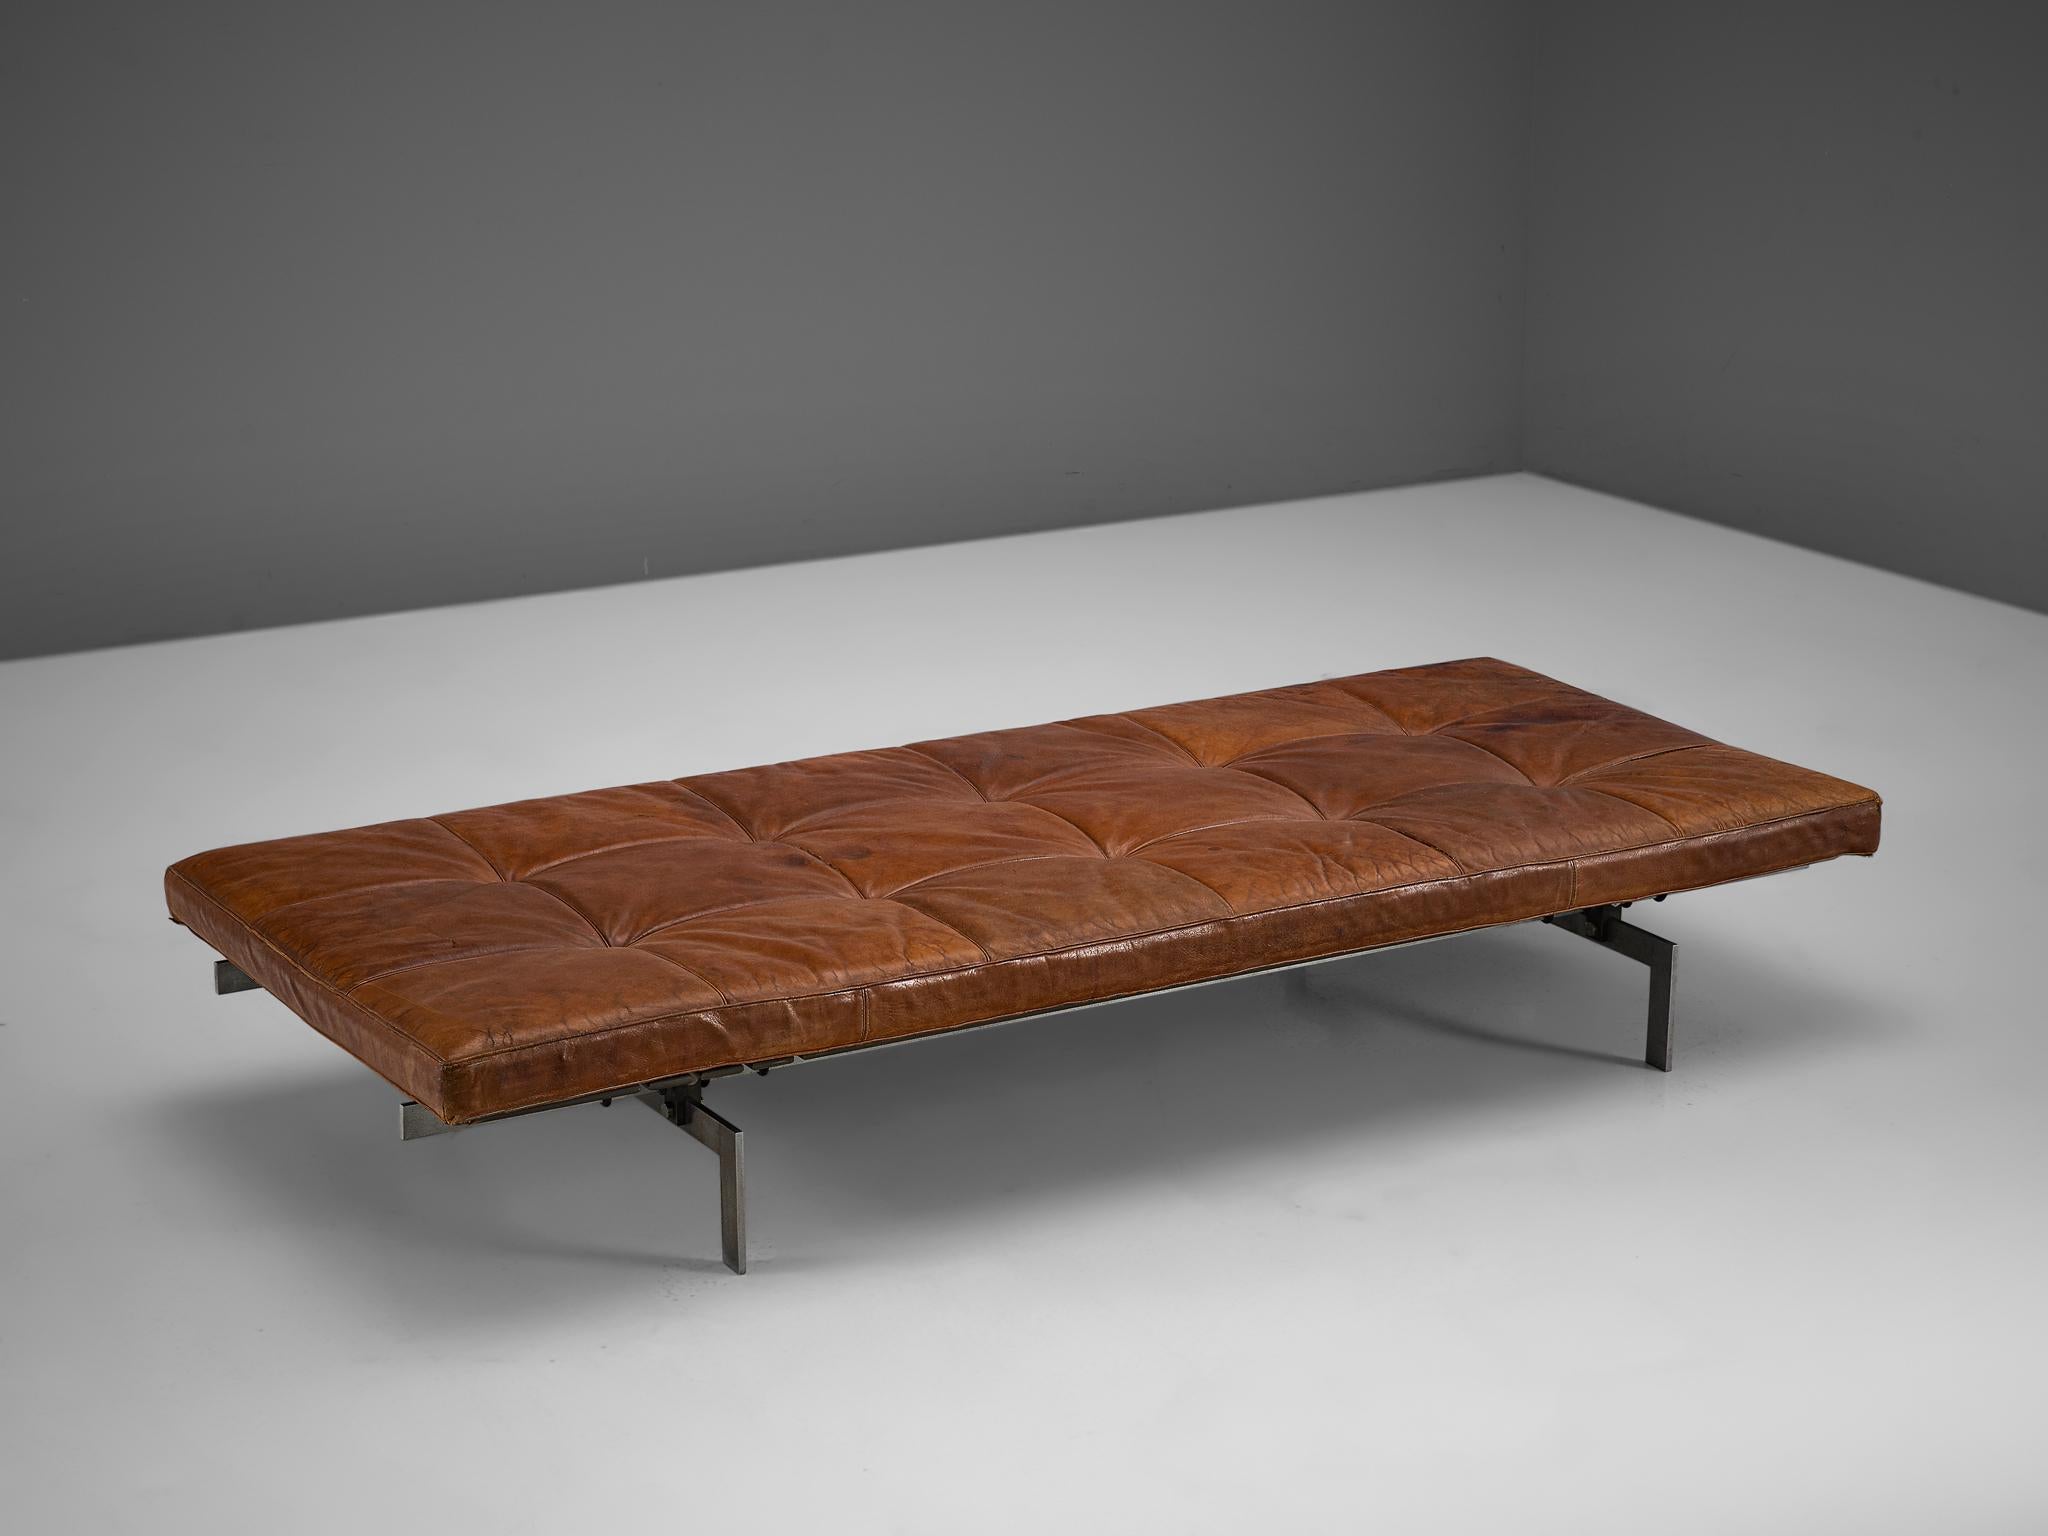 Poul Kjærholm for E. Kold Christensen, PK80 daybed, leather and stainless steel, Denmark, 1957.

This stunning, patinated PK80 daybed is designed by Poul Kjaerholm in 1957. The chosen materials are typical for Poul Kjaerholm as he embraced